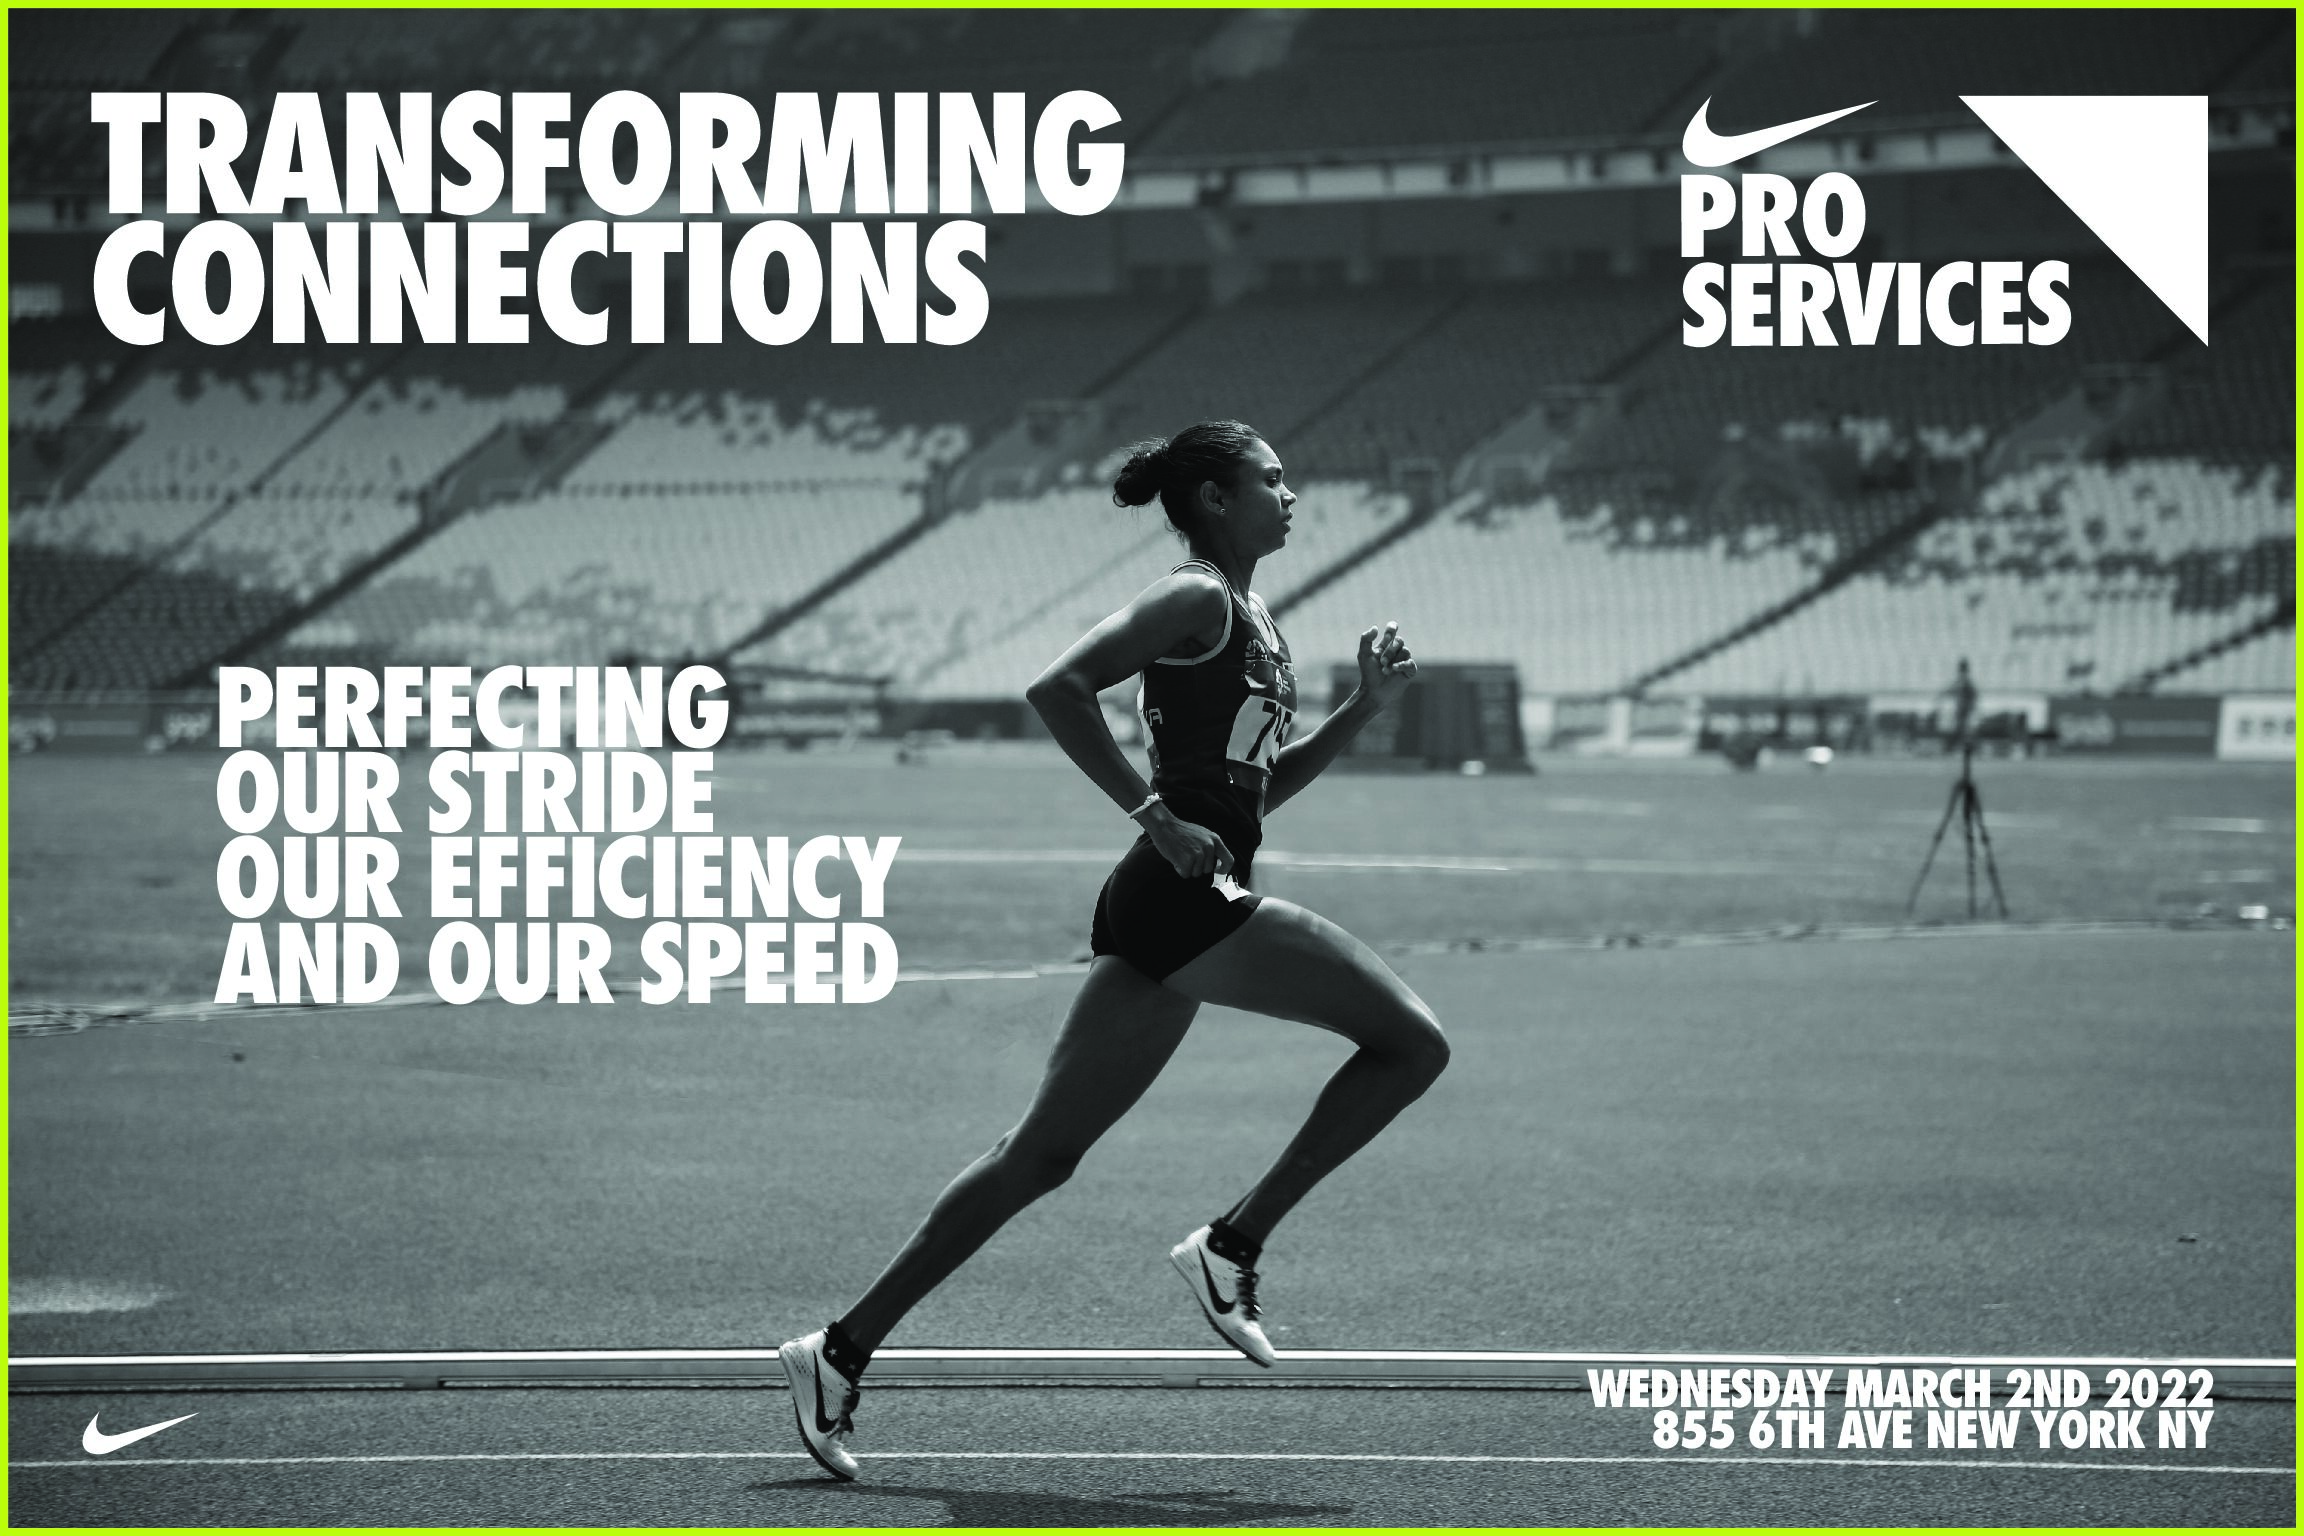 NIKE PRO SERVICES TRANSFORMING CONNECTIONS POSTER